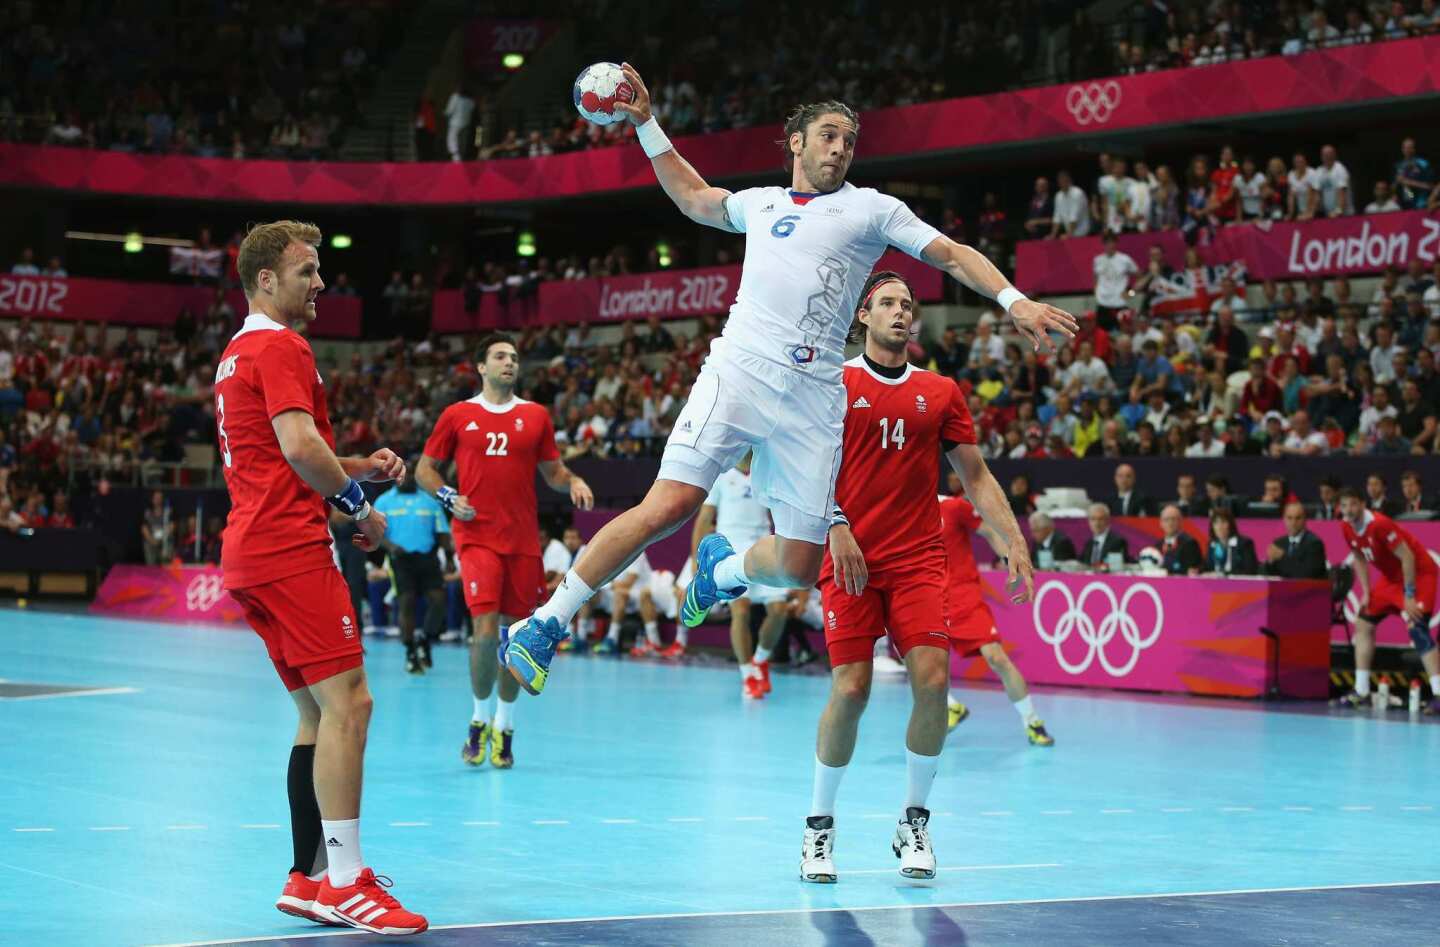 Bertrand Gille of France, one of the world's best players, goes airborne during the men's handball match between France and Great Britain at the Copper Box.